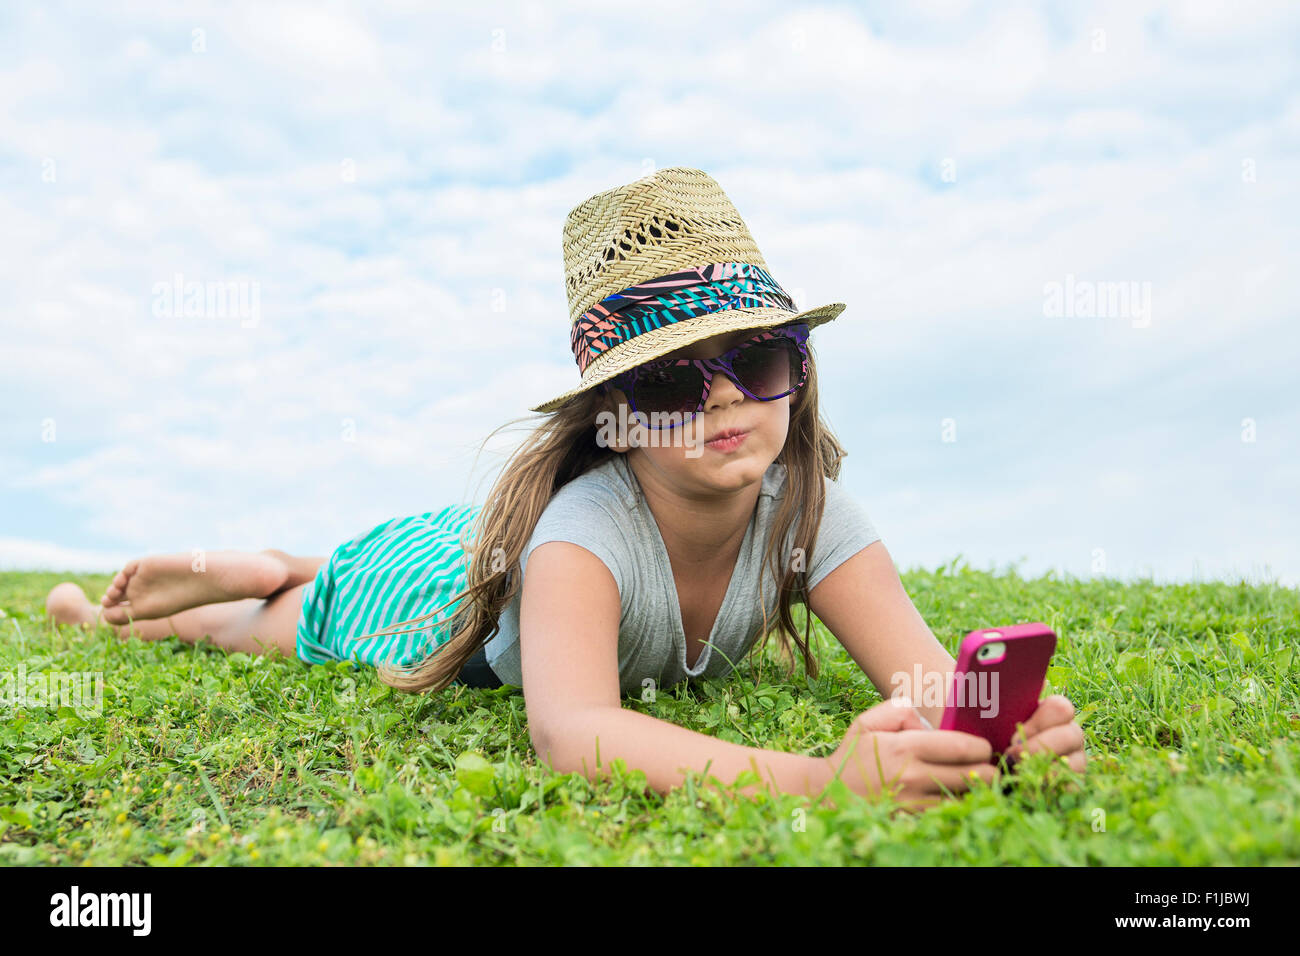 Beautiful portrait of a little girl outside on grass Stock Photo